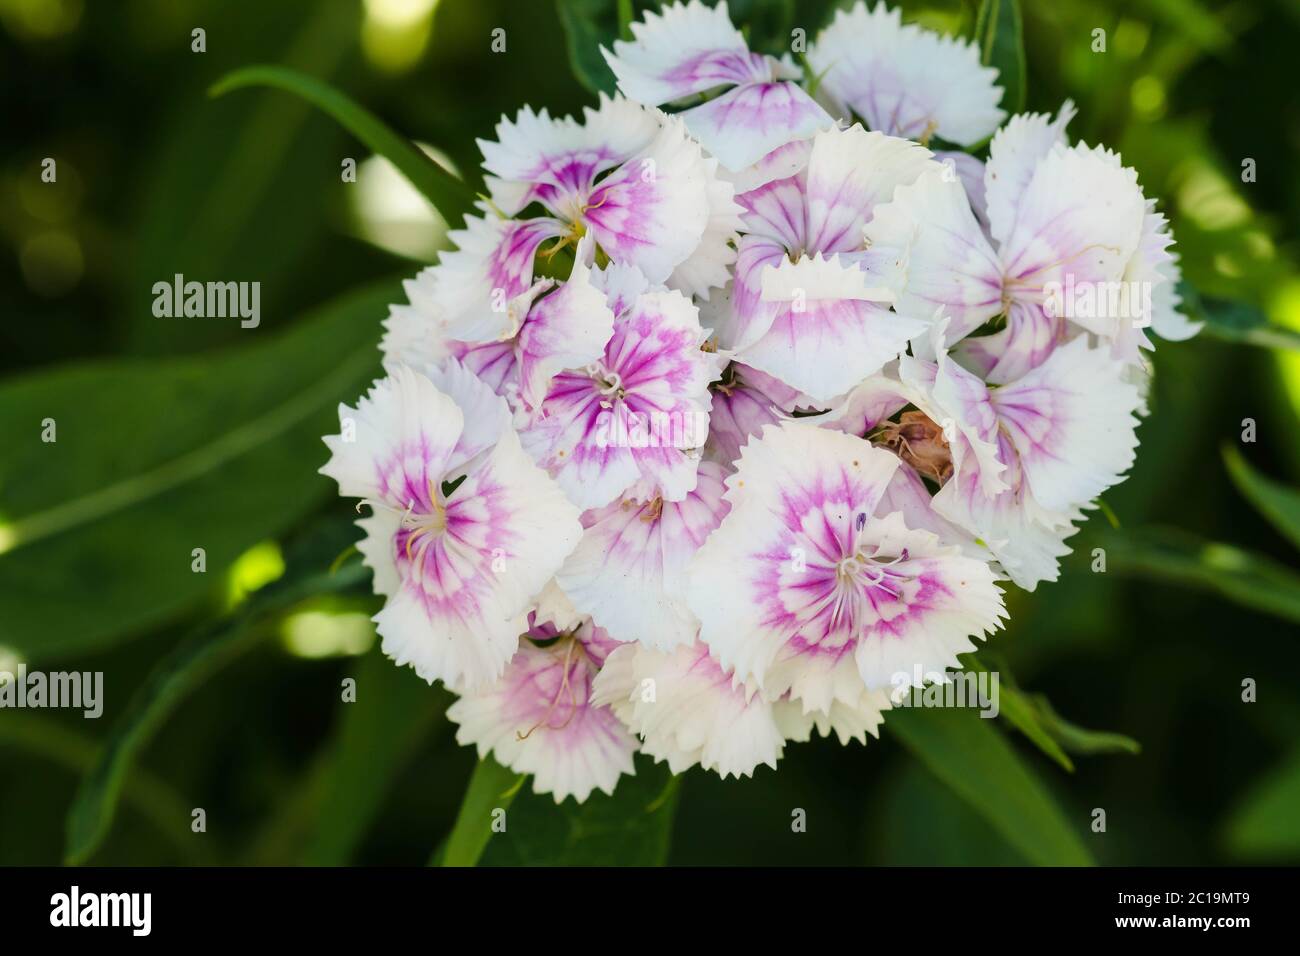 the small pink and while blooms produced by this Sweet William wildflower Stock Photo